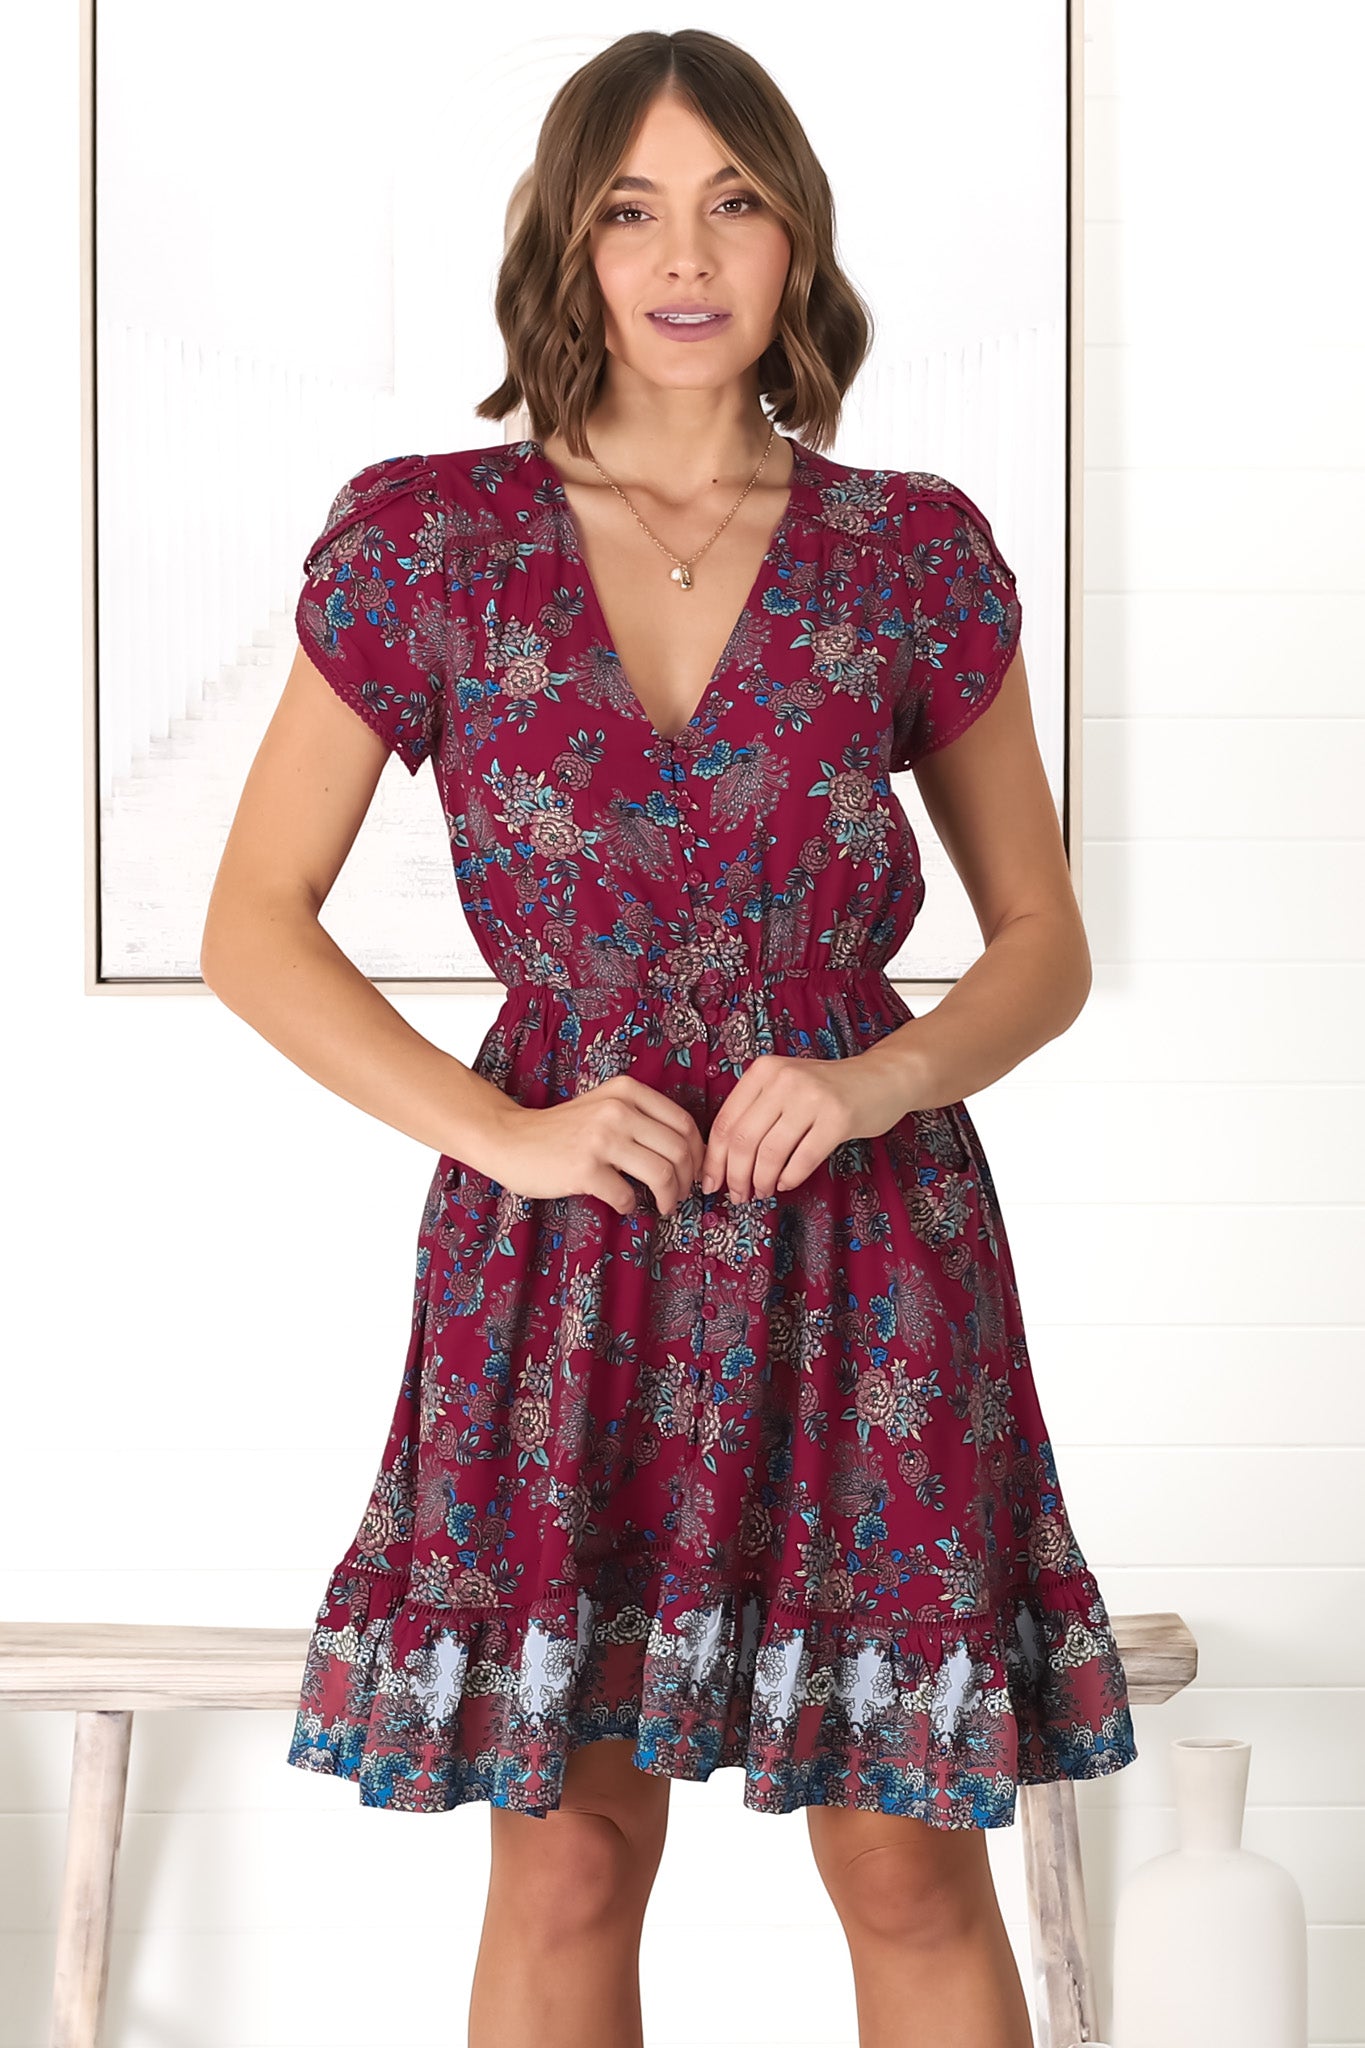 JAASE - Lizzie Mini Dress: Butterfly Cap Sleeve Button Down Dress with Pockets in Strawberry Kiss Print